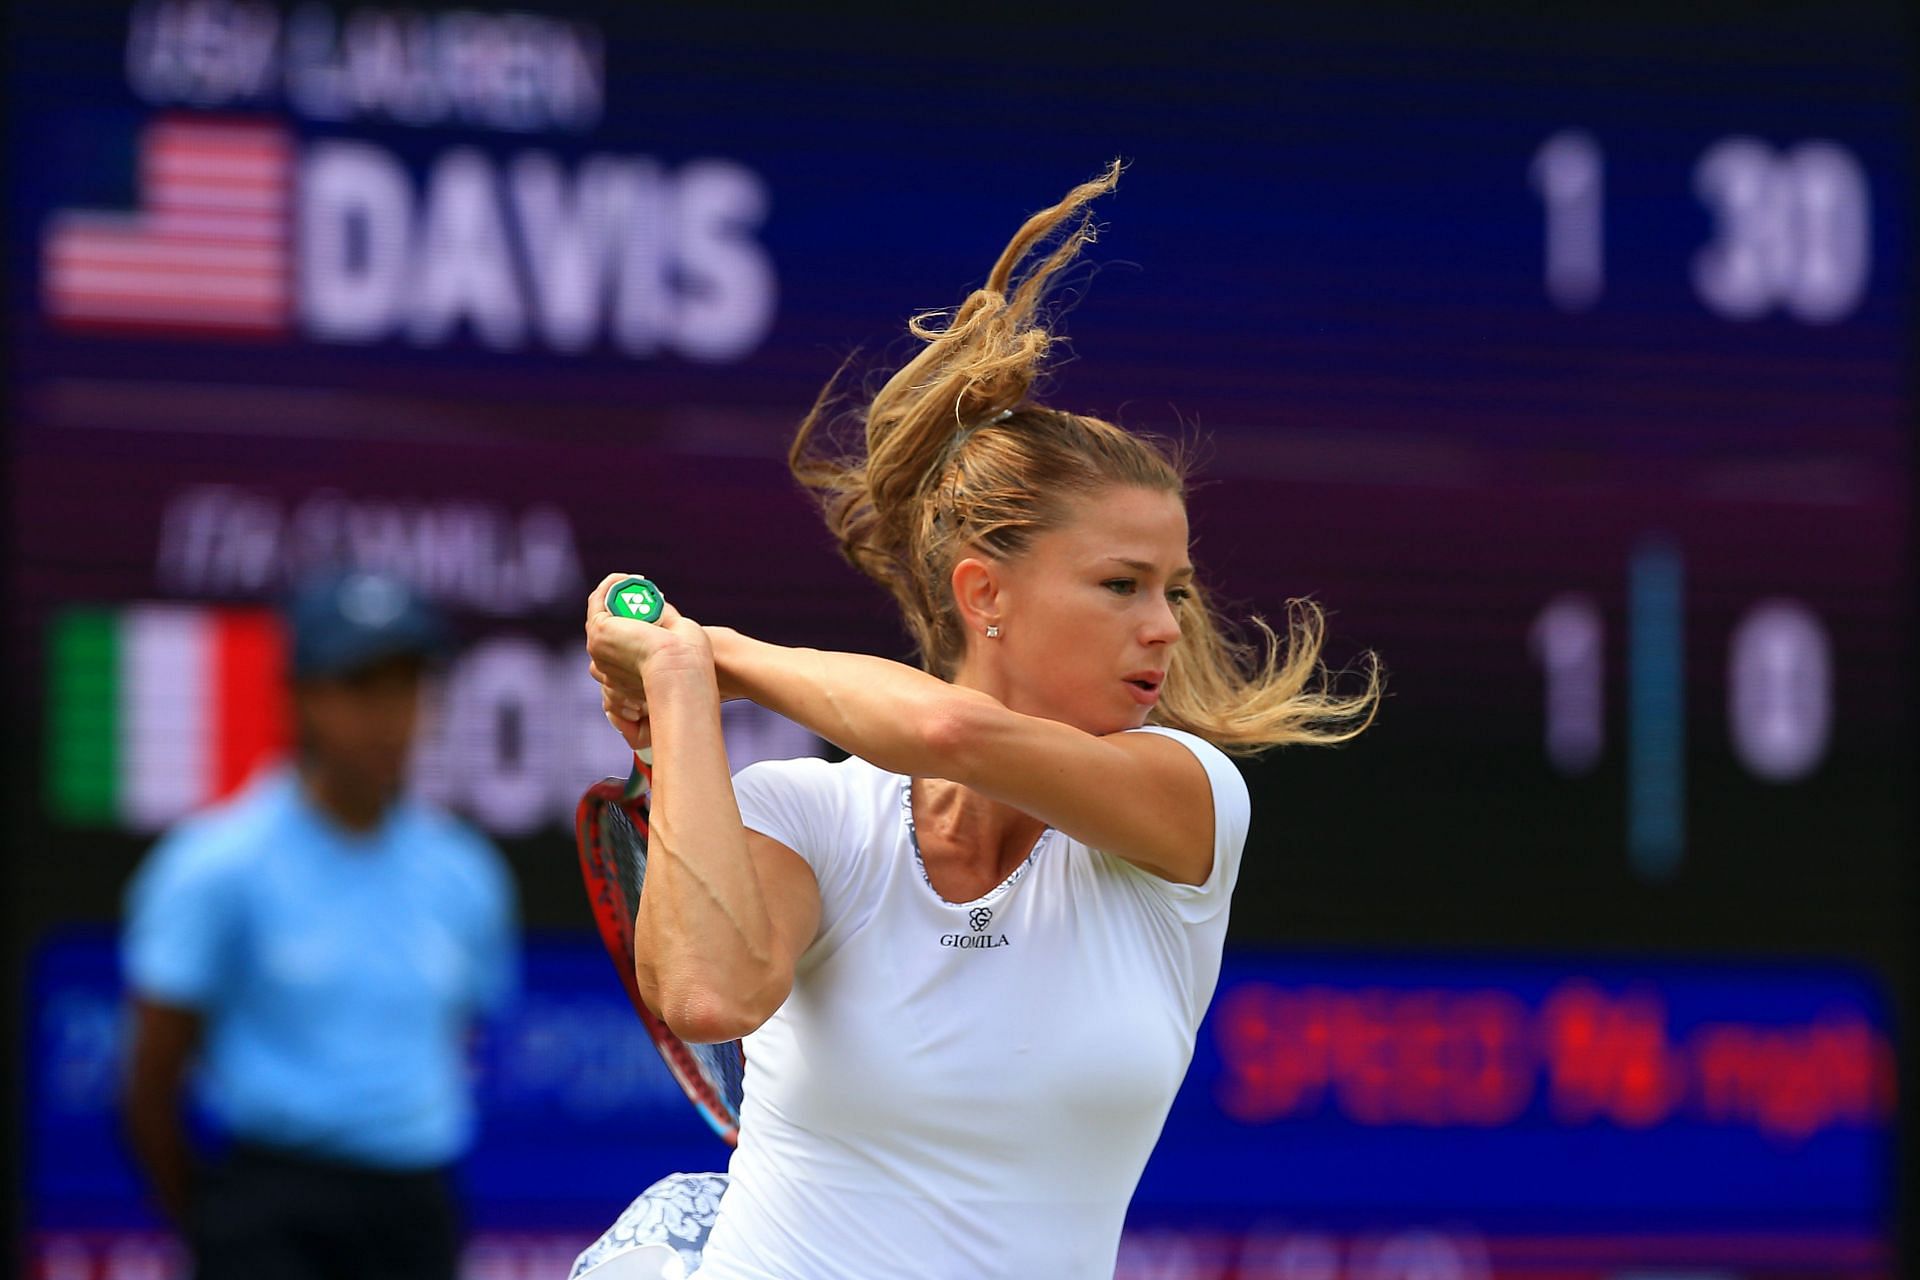 Camila Giorgi reached the semifinals in Eastbourne last year